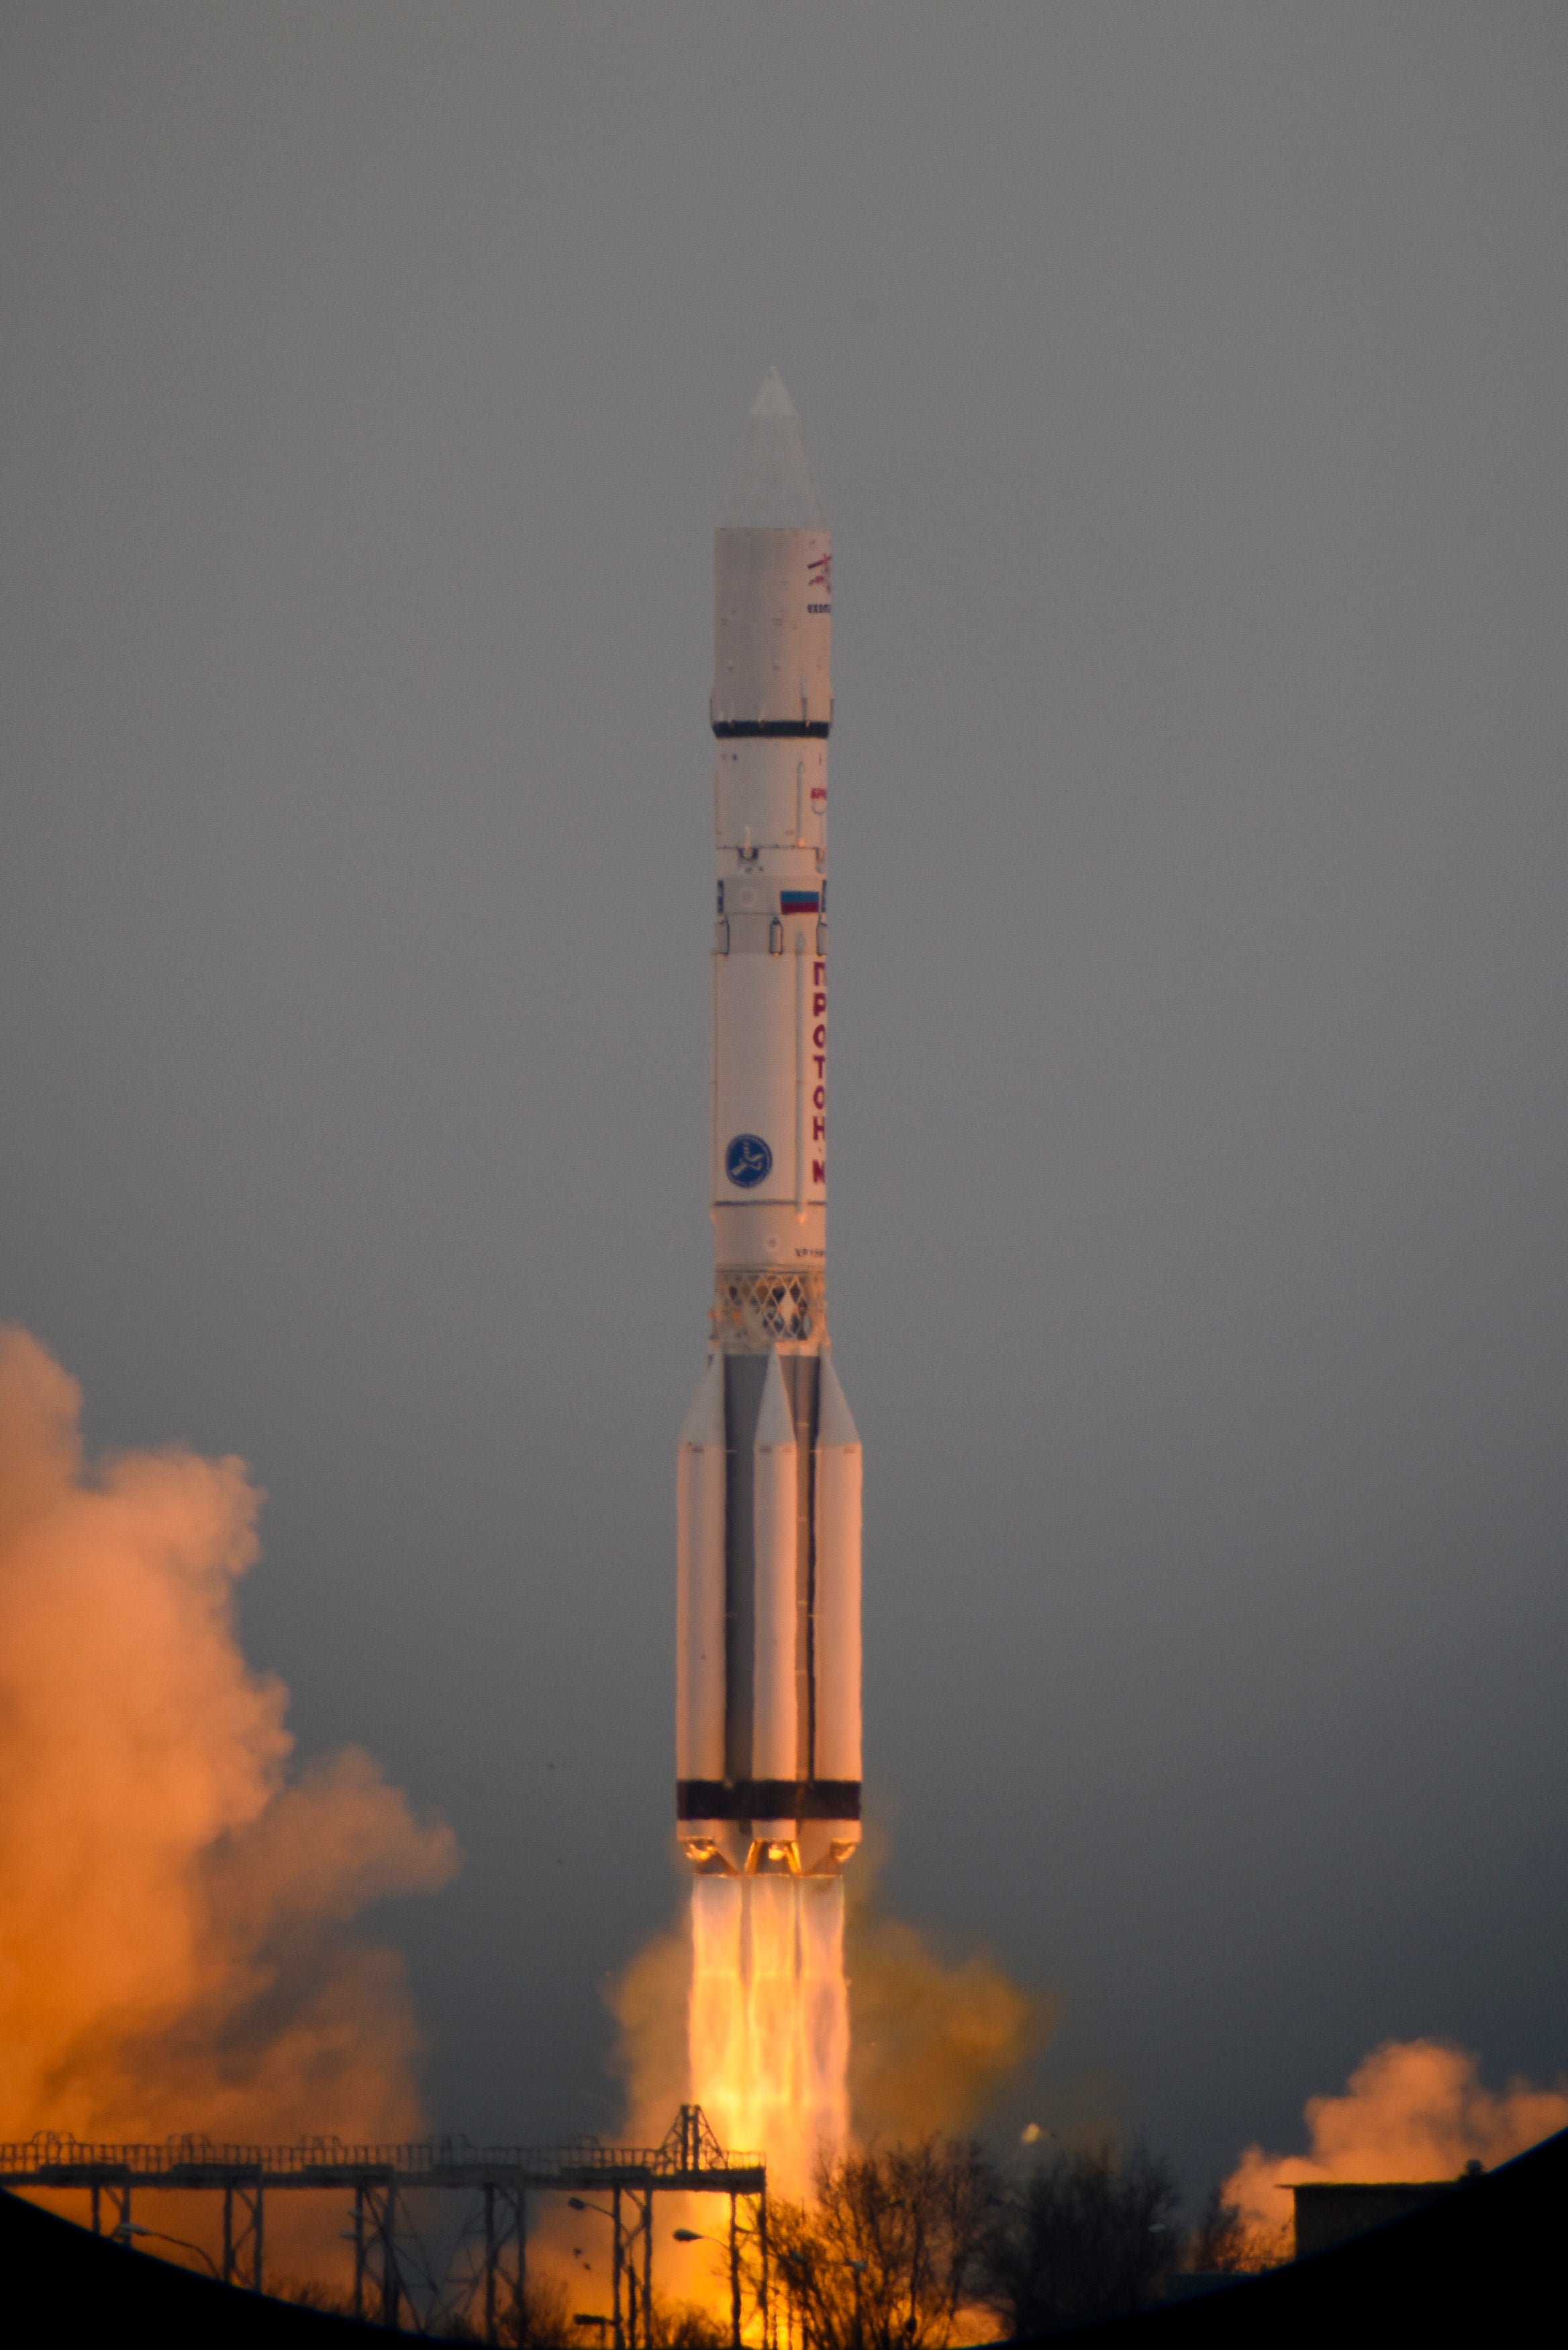 A Roscosmos Proton rocket launches for Mars in 2016. (Photo: Stephane Corvaja/ESA, Getty Images)